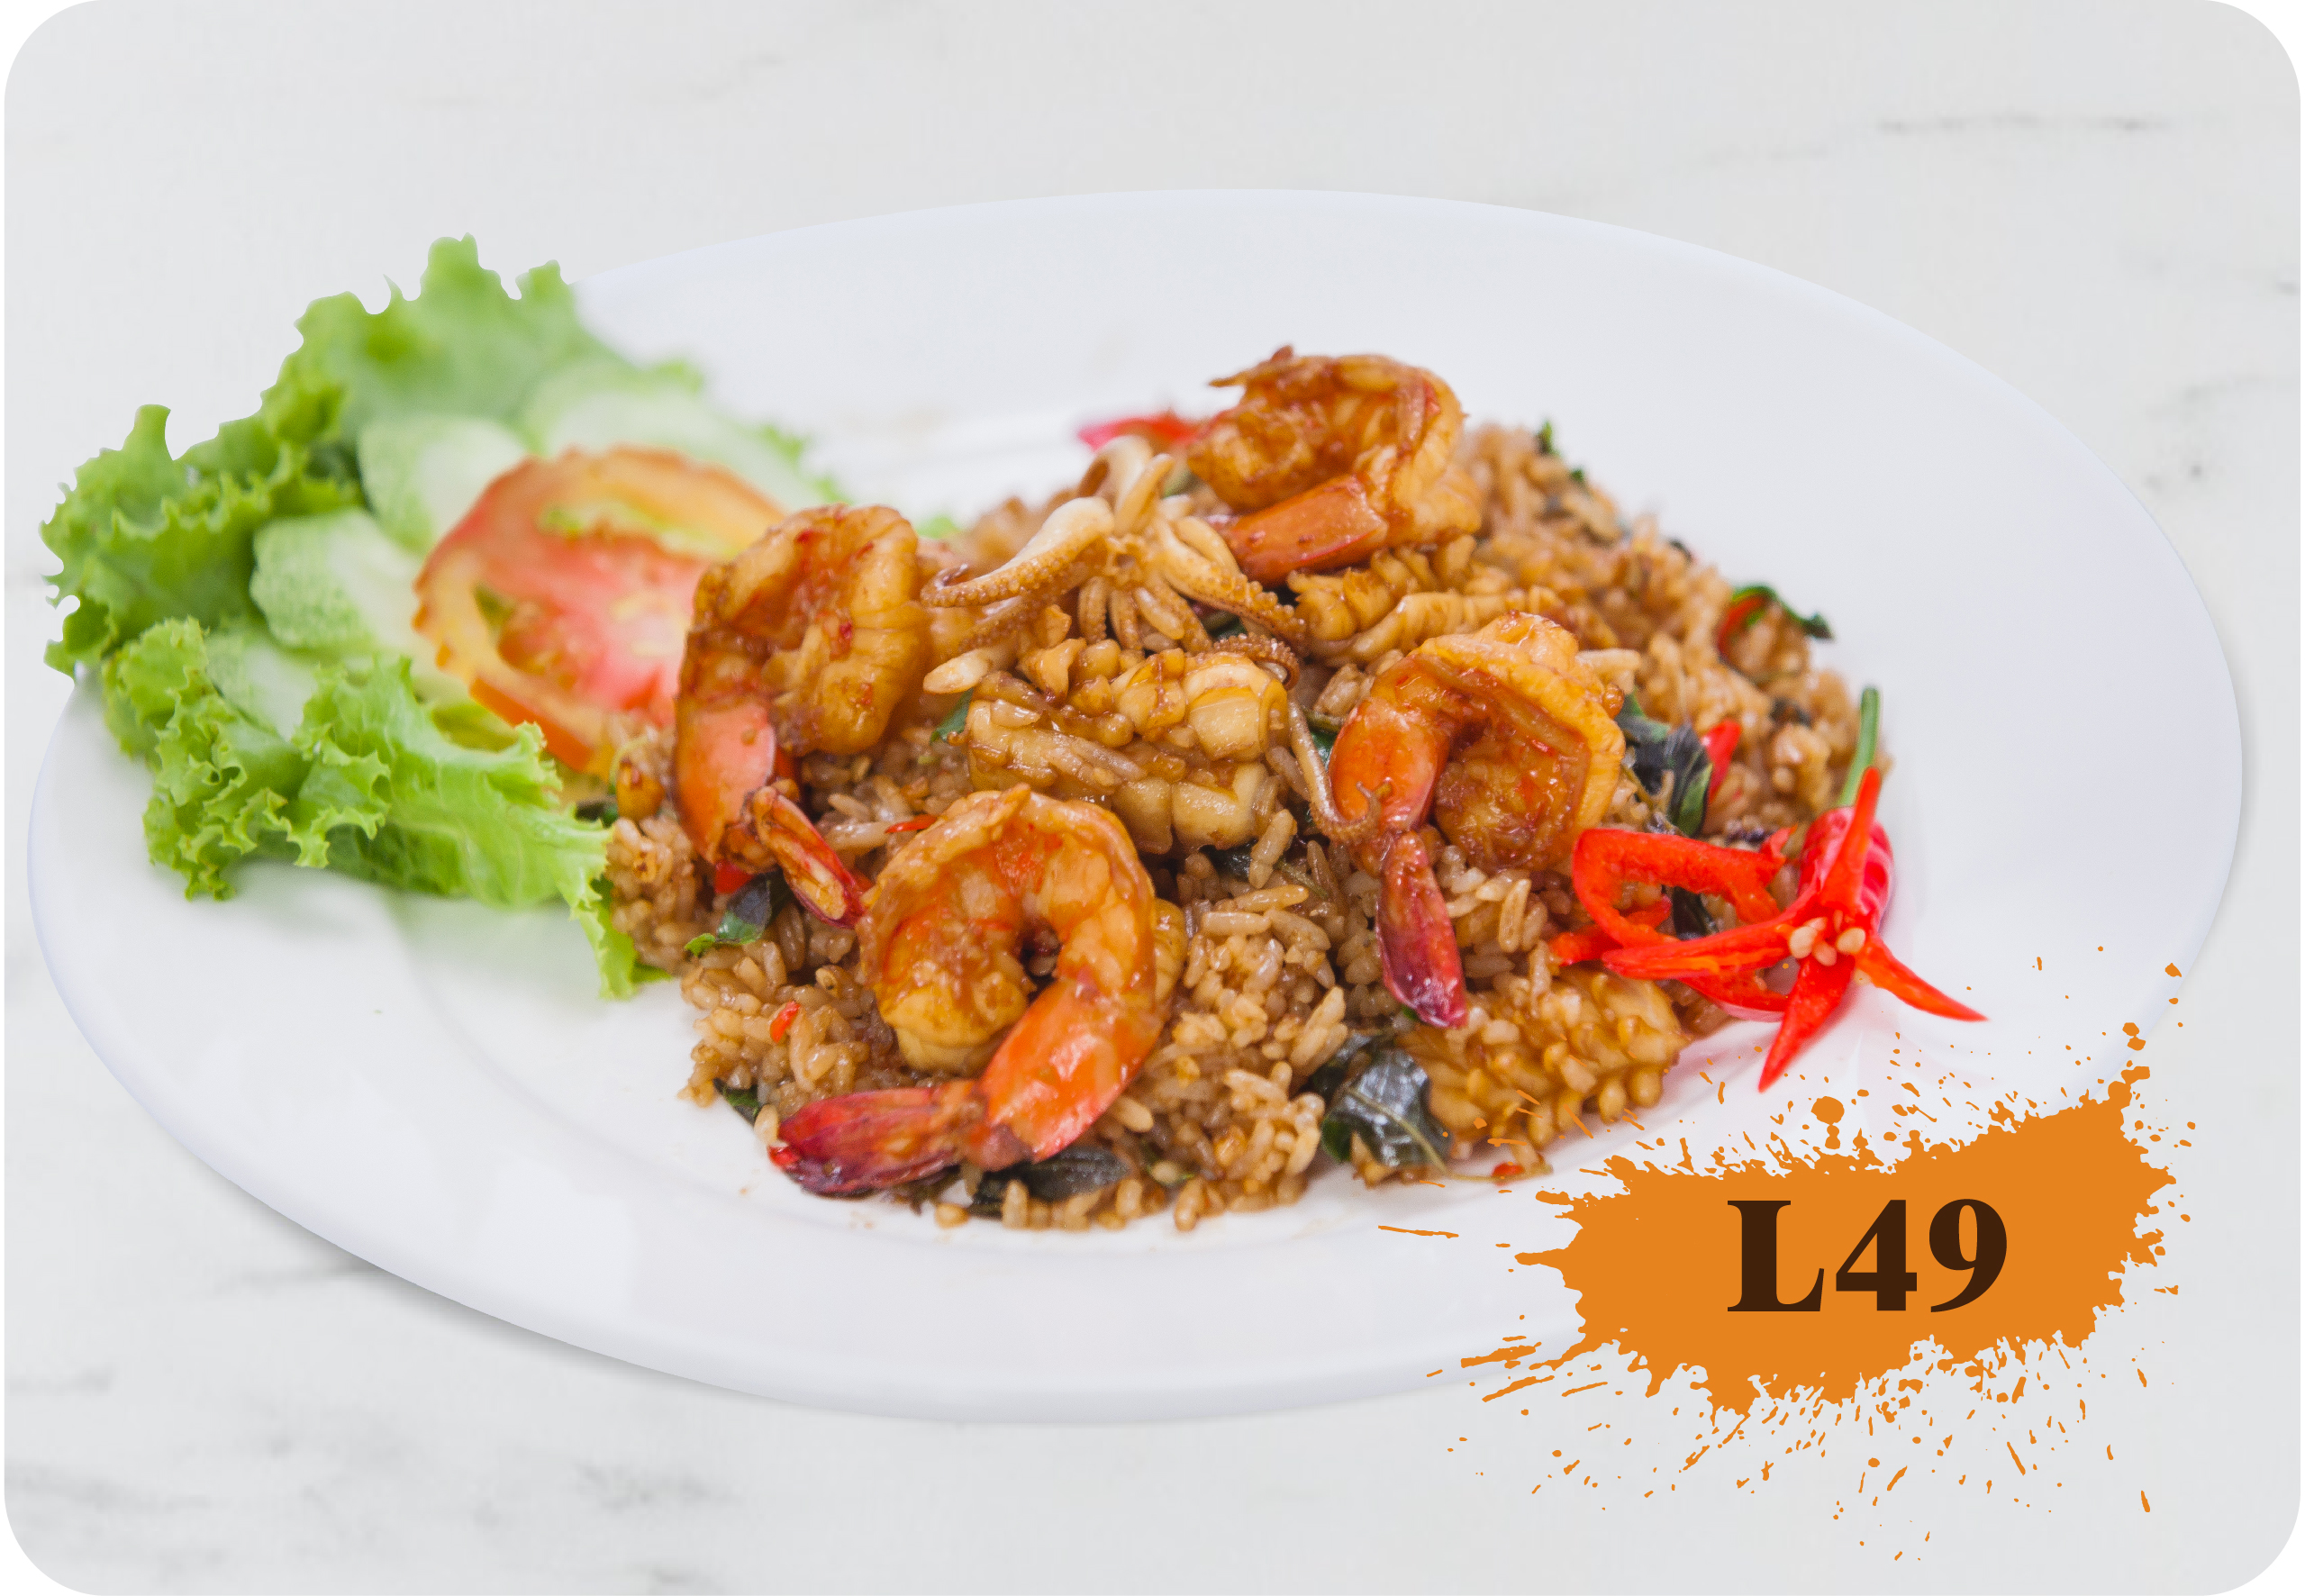 66.Fried Rice with Hot Basil Leaces and Seafood